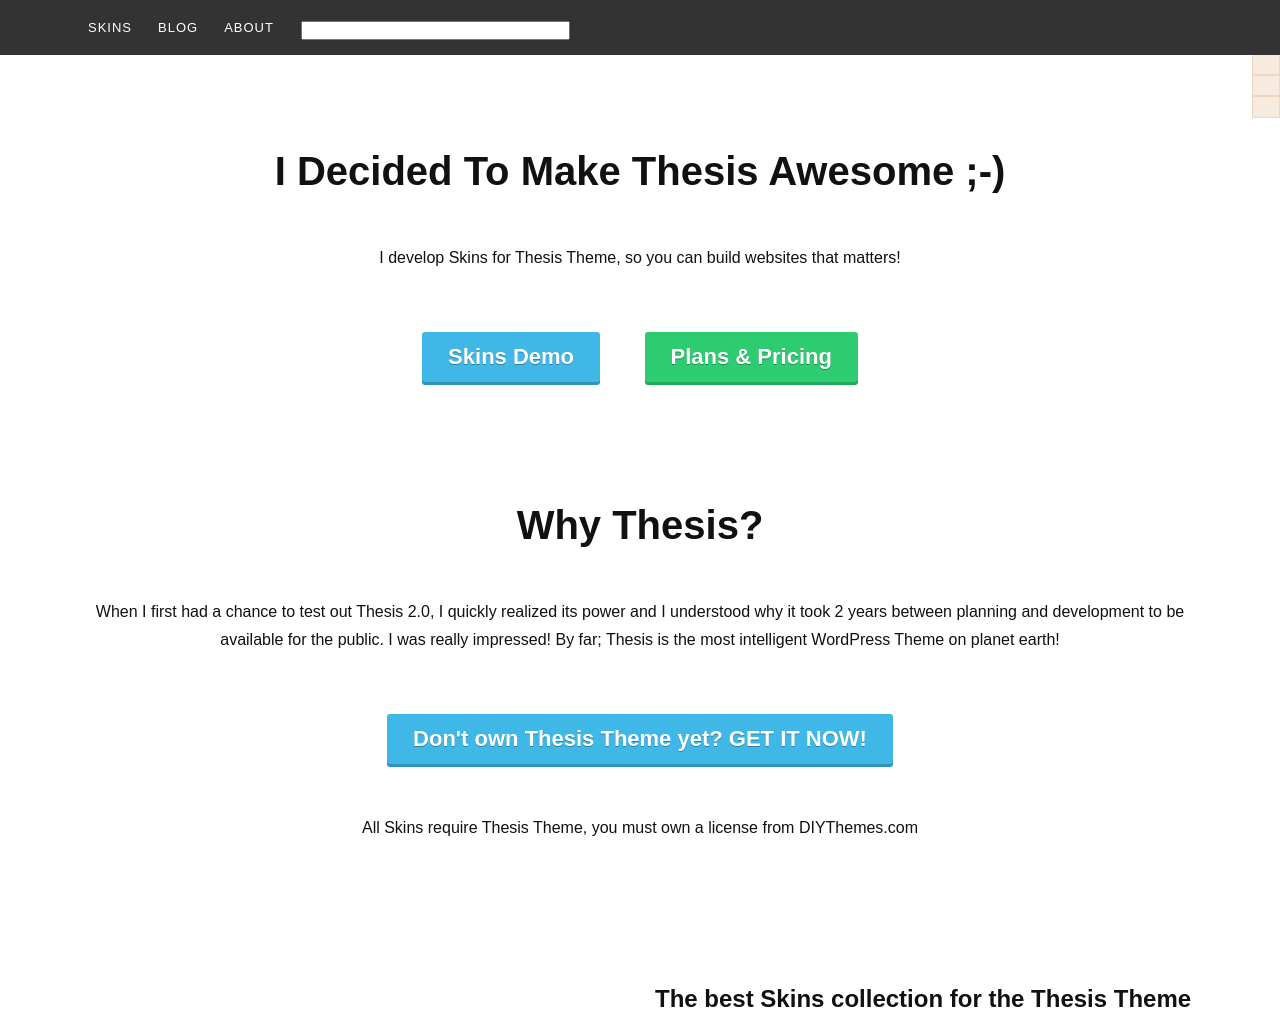 thesisawesome.com